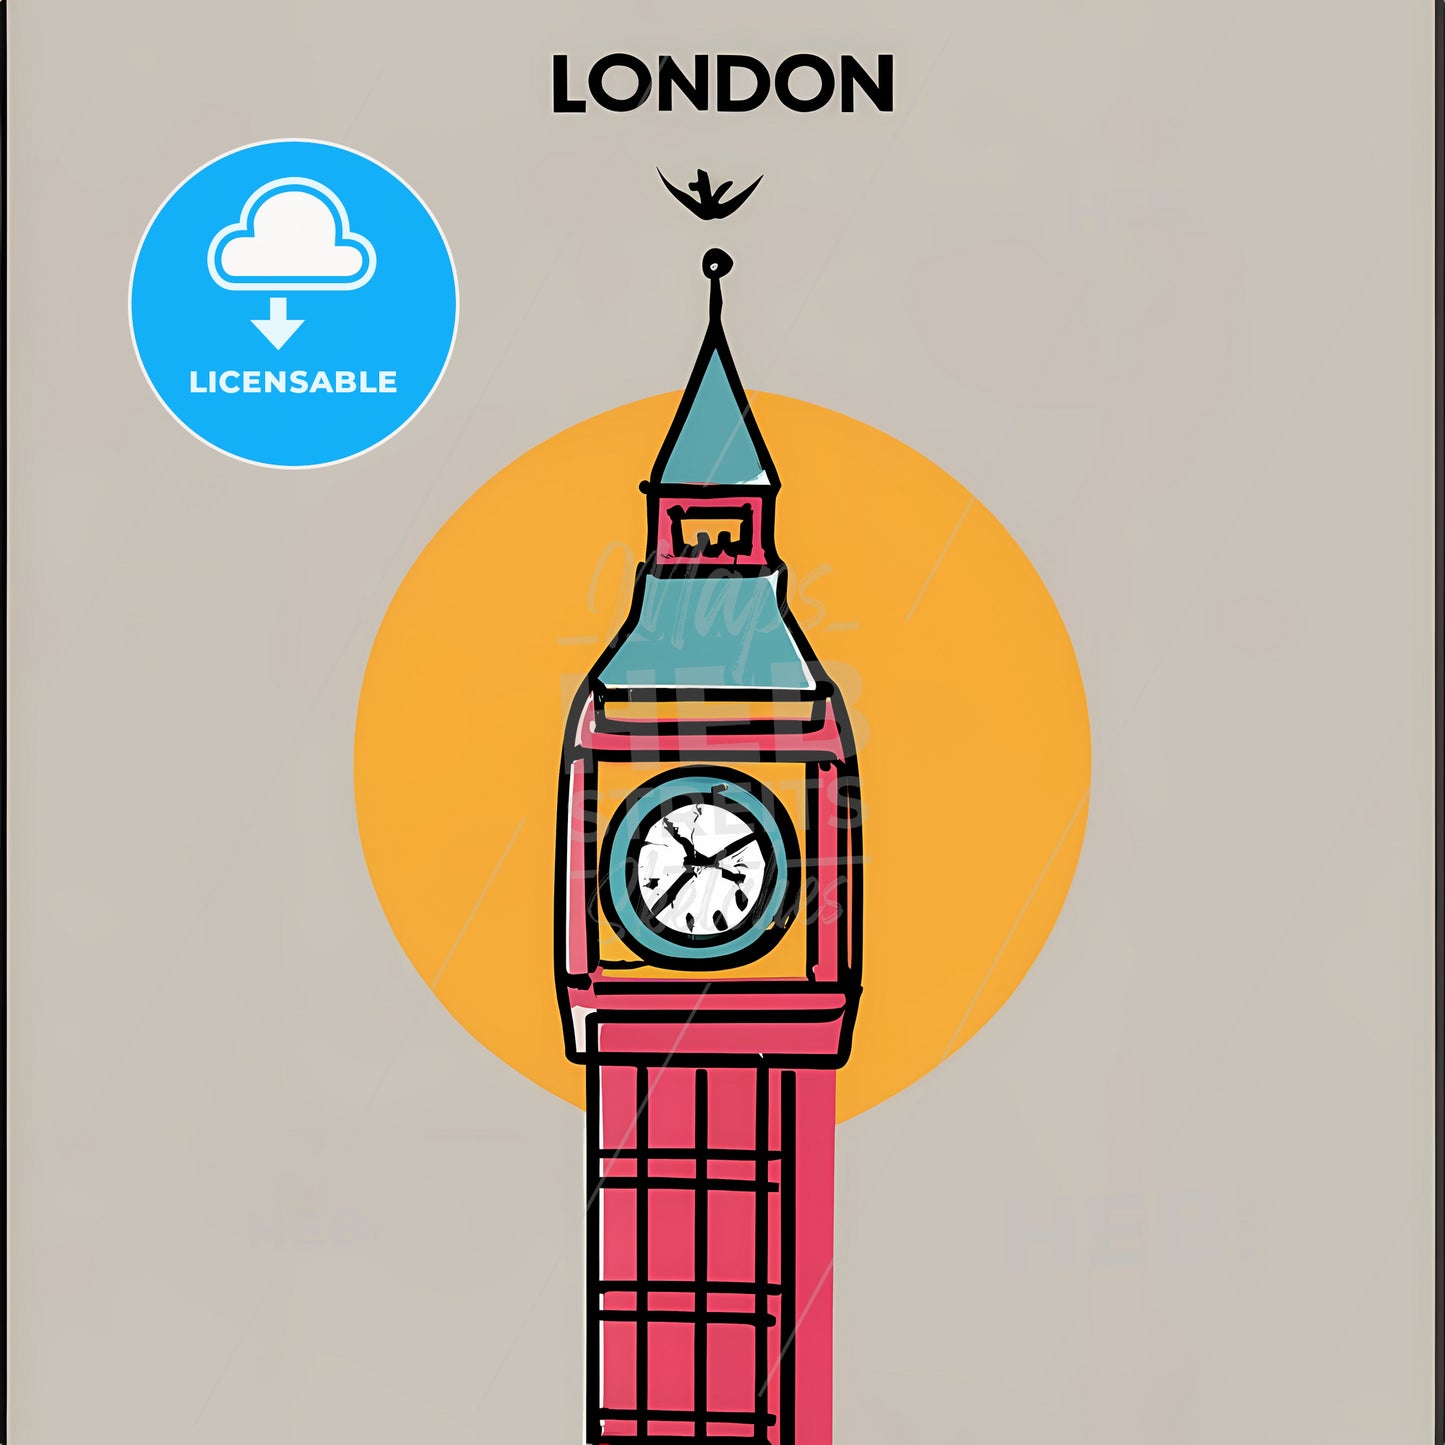 London, Big Ben - A Poster With A Clock Tower